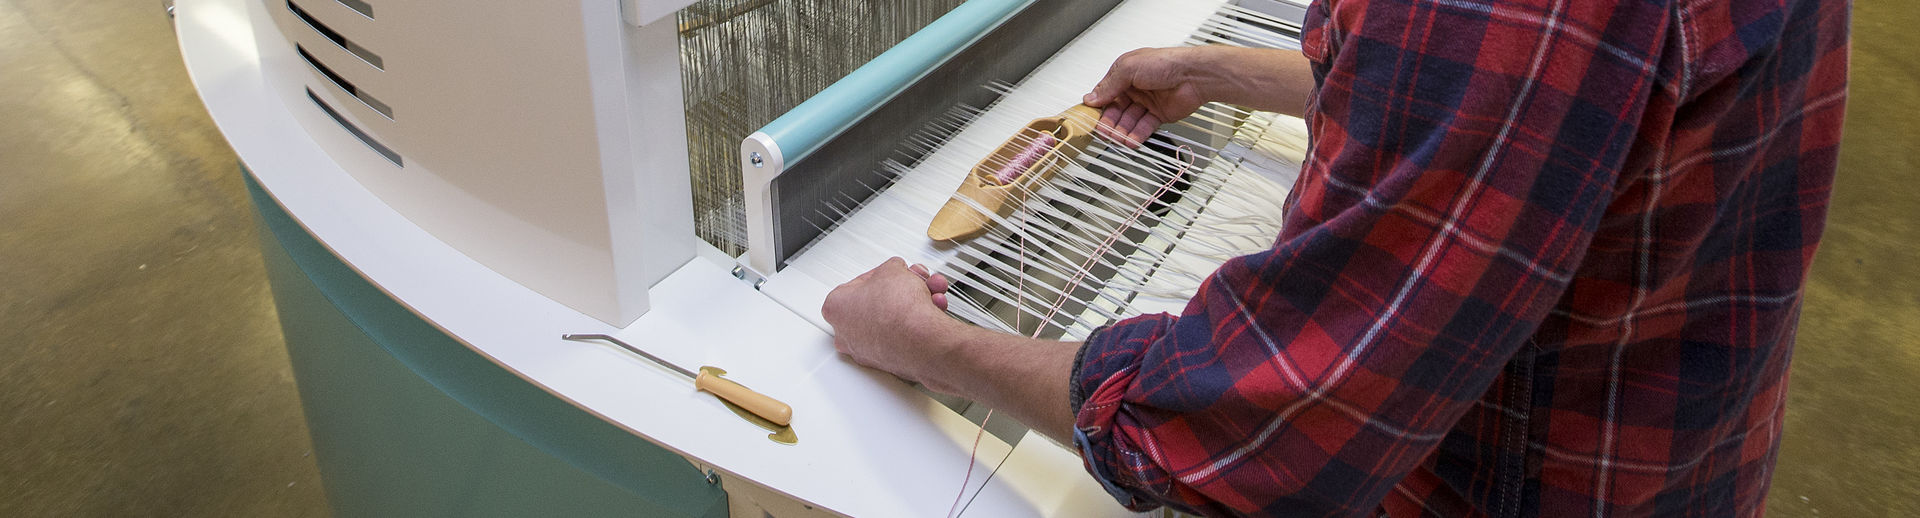 A student wearing a plaid shirt and yellow hat works on a loom.